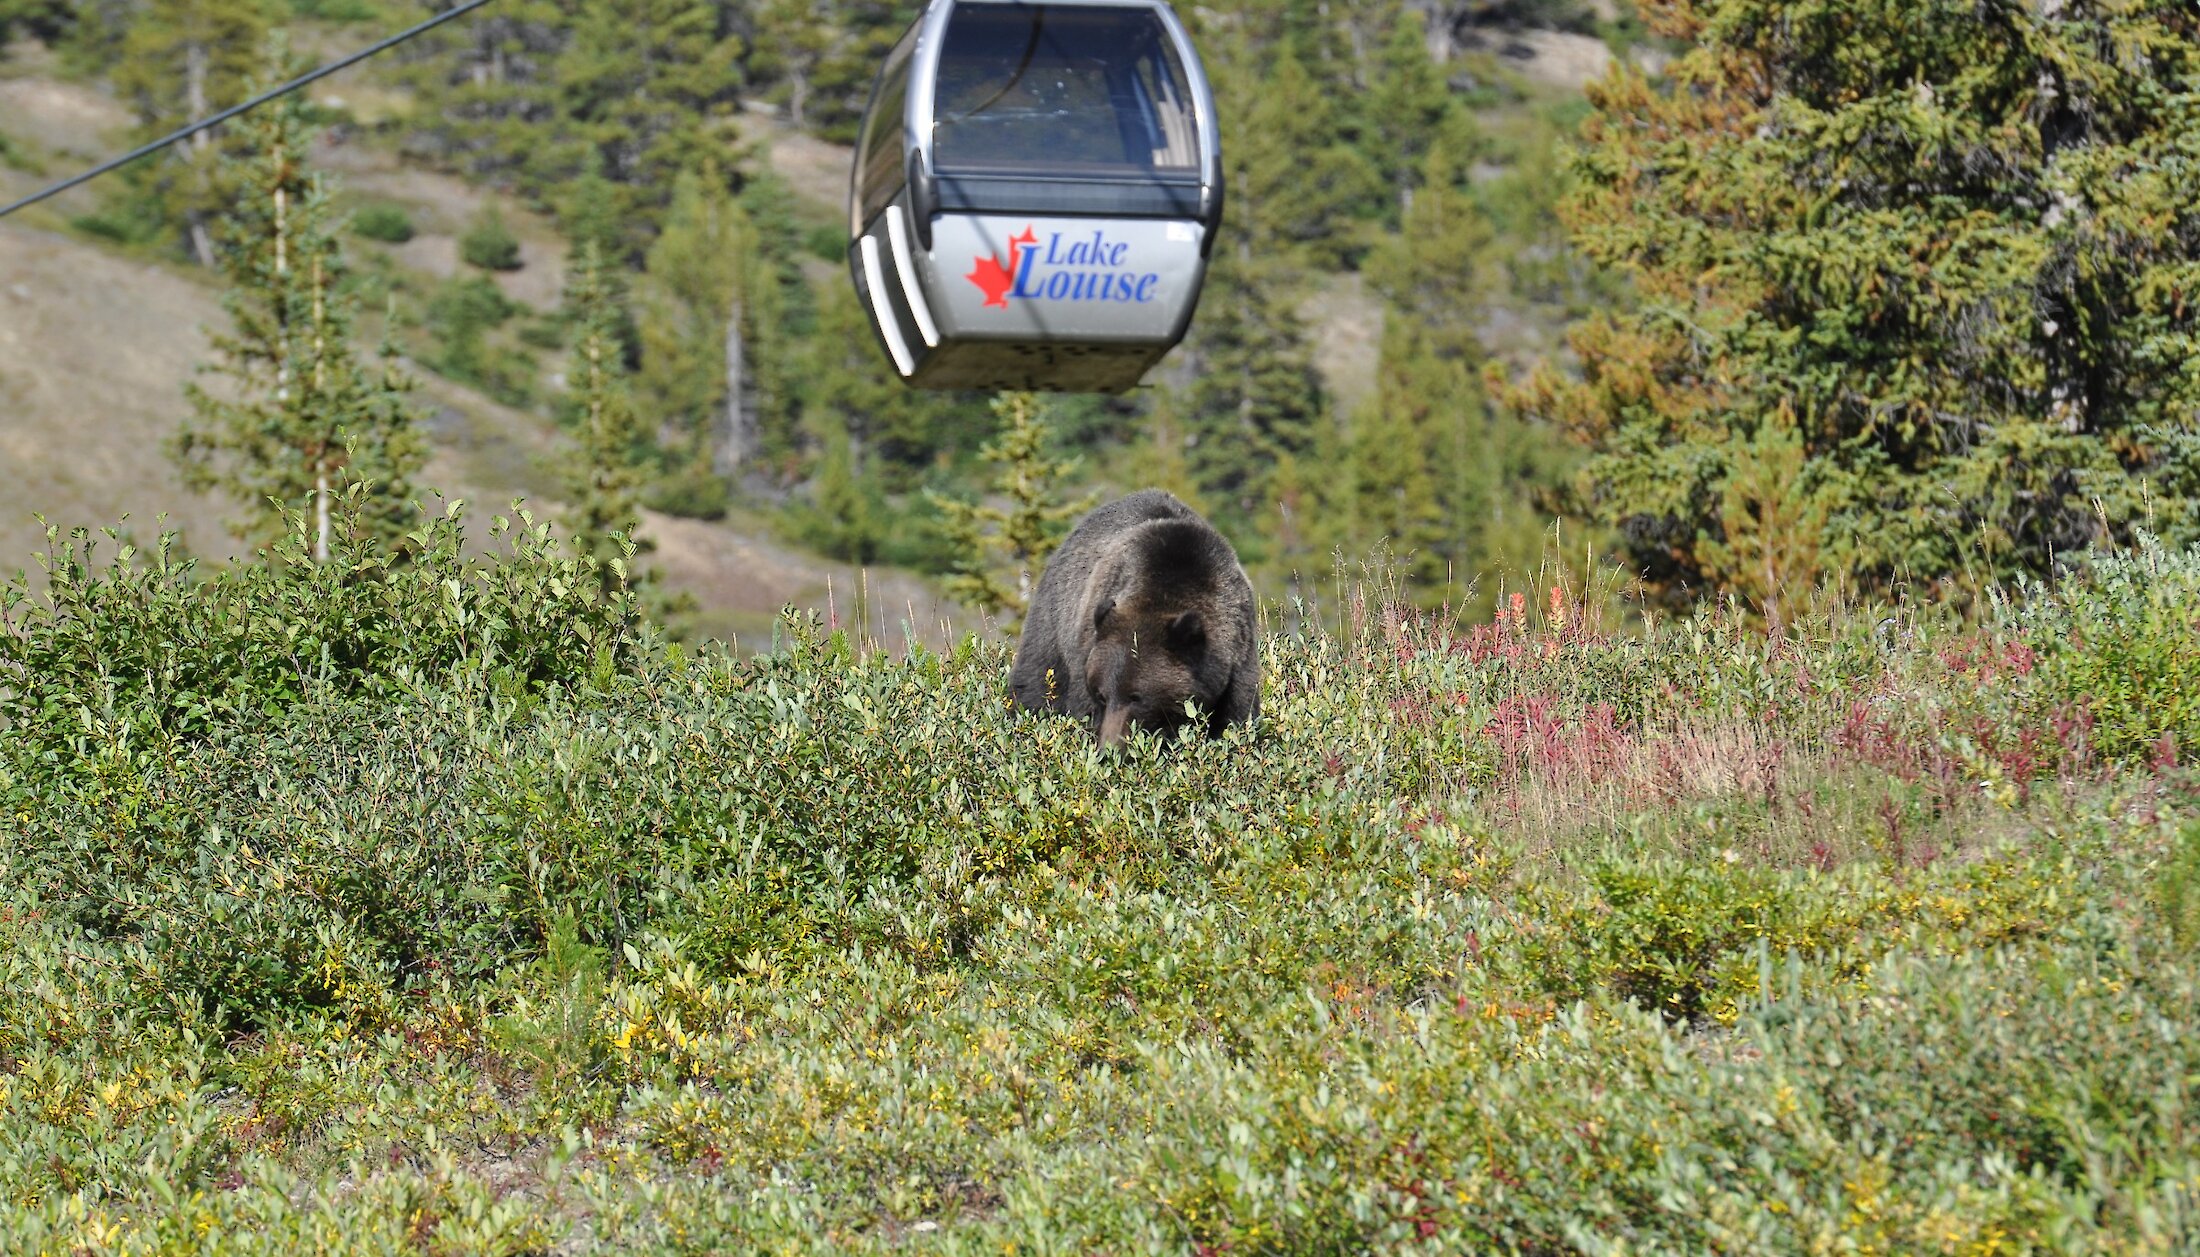 A grizzly bear roaming underneath the Lake Louise Sightseeing Gondola in Banff National Park